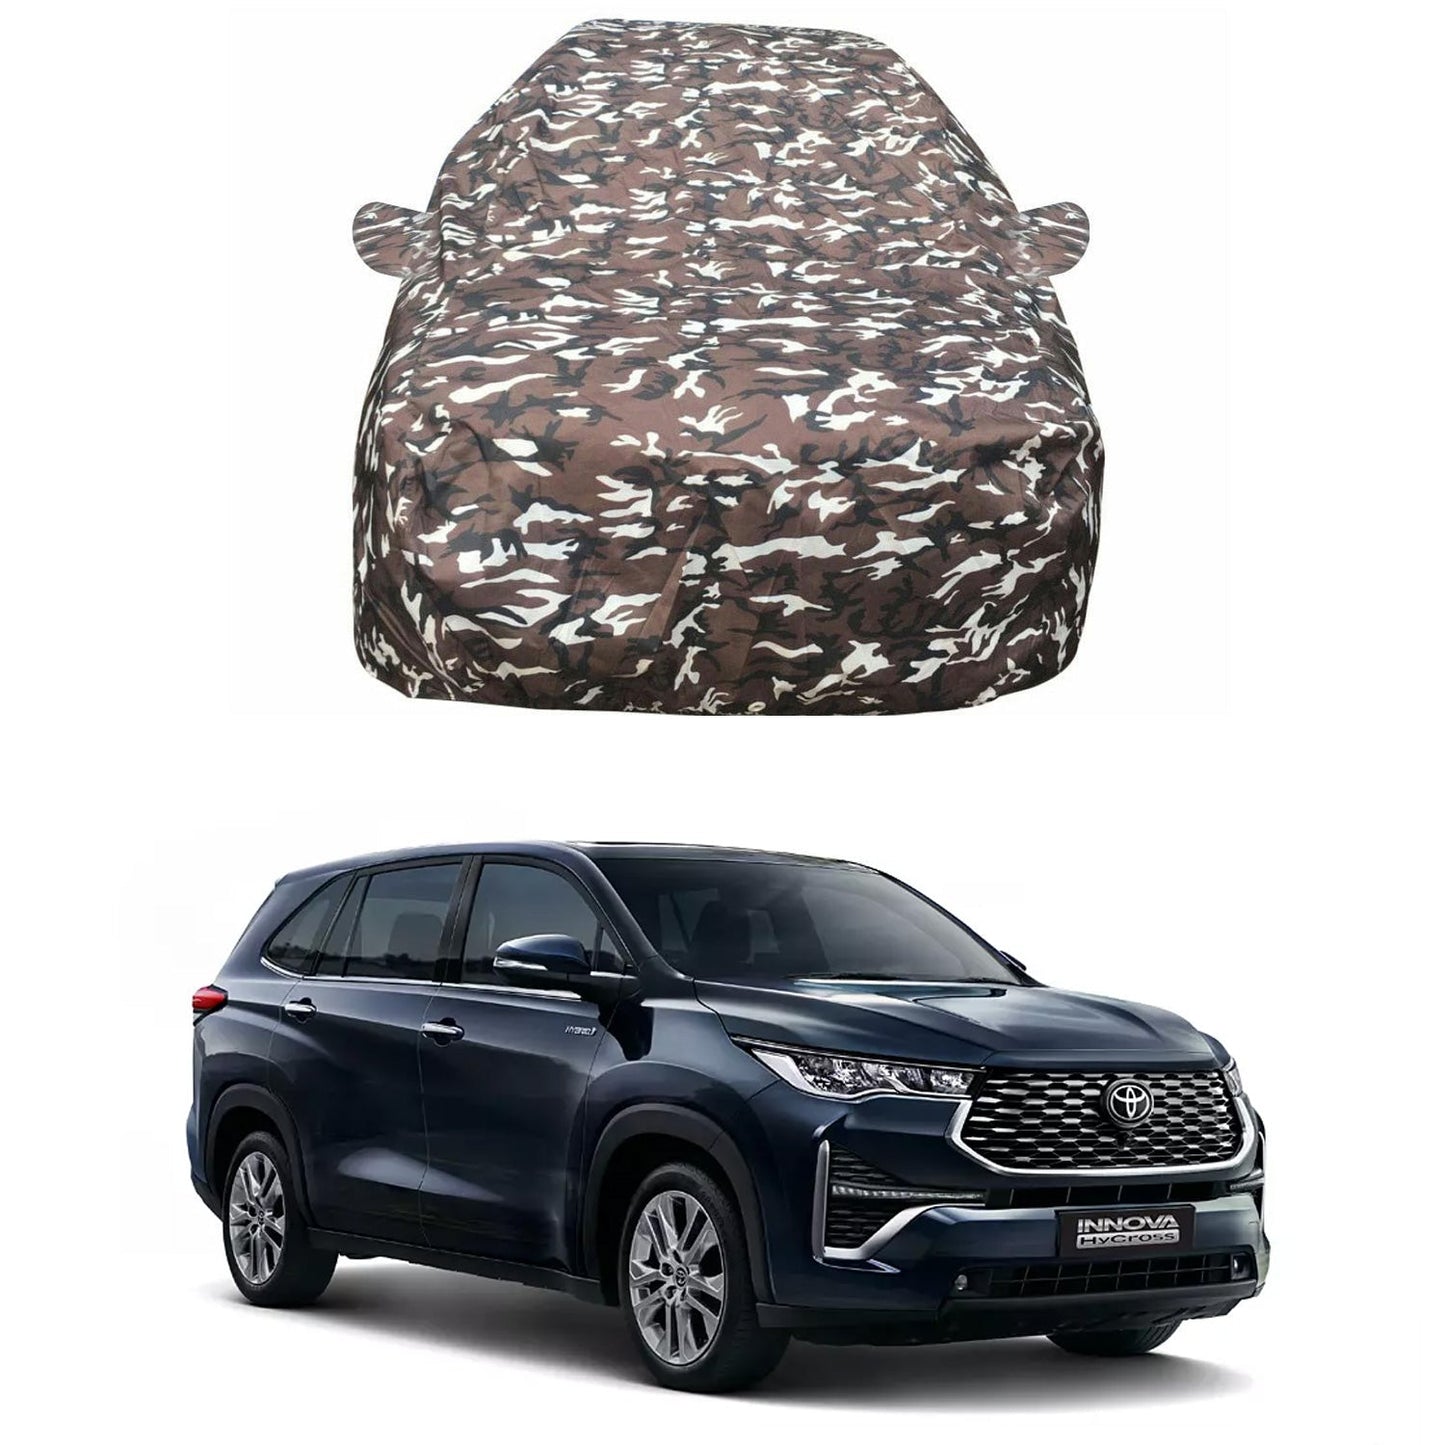 Oshotto Ranger Design Made of 100% Waterproof Fabric Multicolor Car Body Cover with Mirror Pockets For Toyota Innova Hycross (Multicolor)